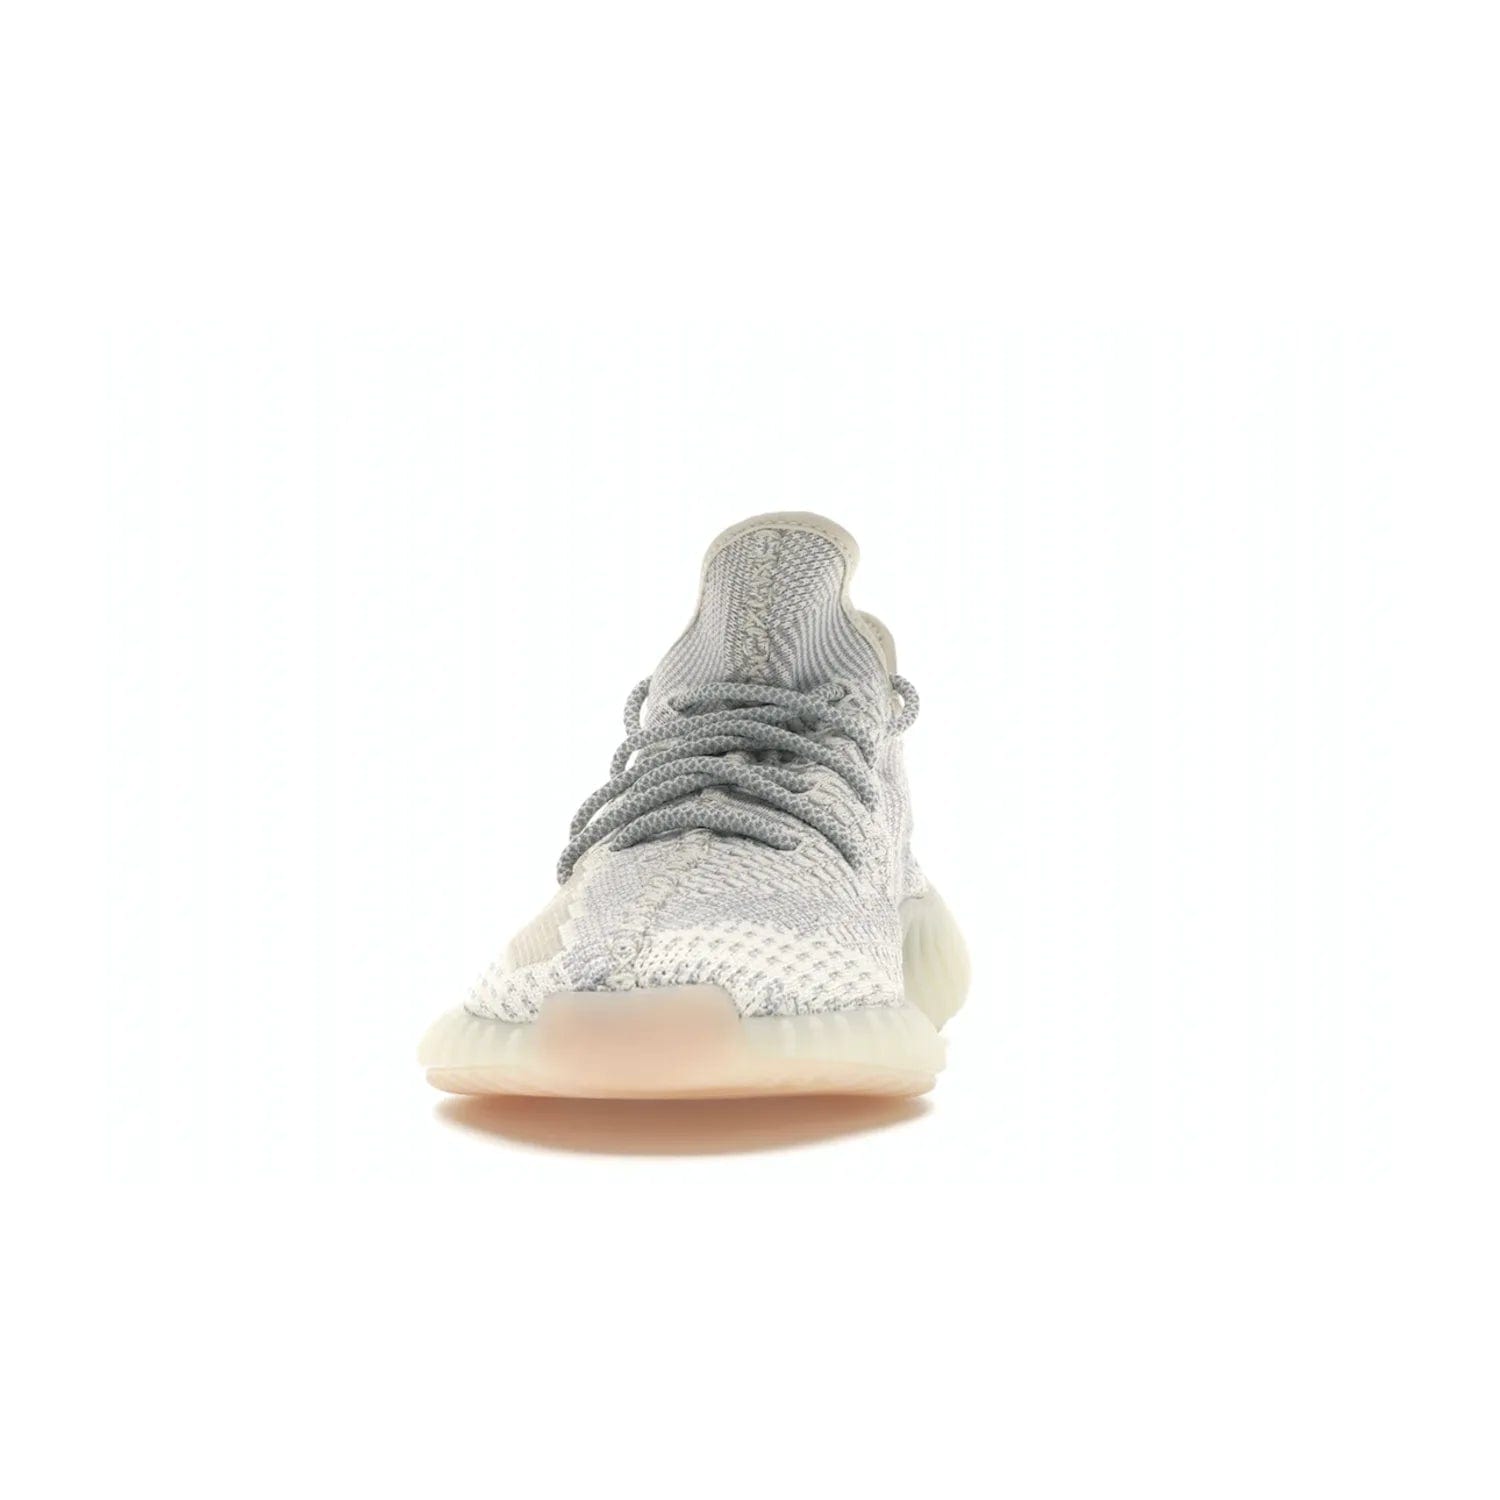 adidas Yeezy Boost 350 V2 Lundmark (Non Reflective) - Image 11 - Only at www.BallersClubKickz.com - Shop the exclusive adidas Yeezy Boost 350 V2 Lundmark with a subtle summer color, mesh upper, white-to-cream transitional midsole, light tan outsole, and pink middle stripe. Comfort and style come together in this perfect summer 350 V2. Released on July 11, 2019.